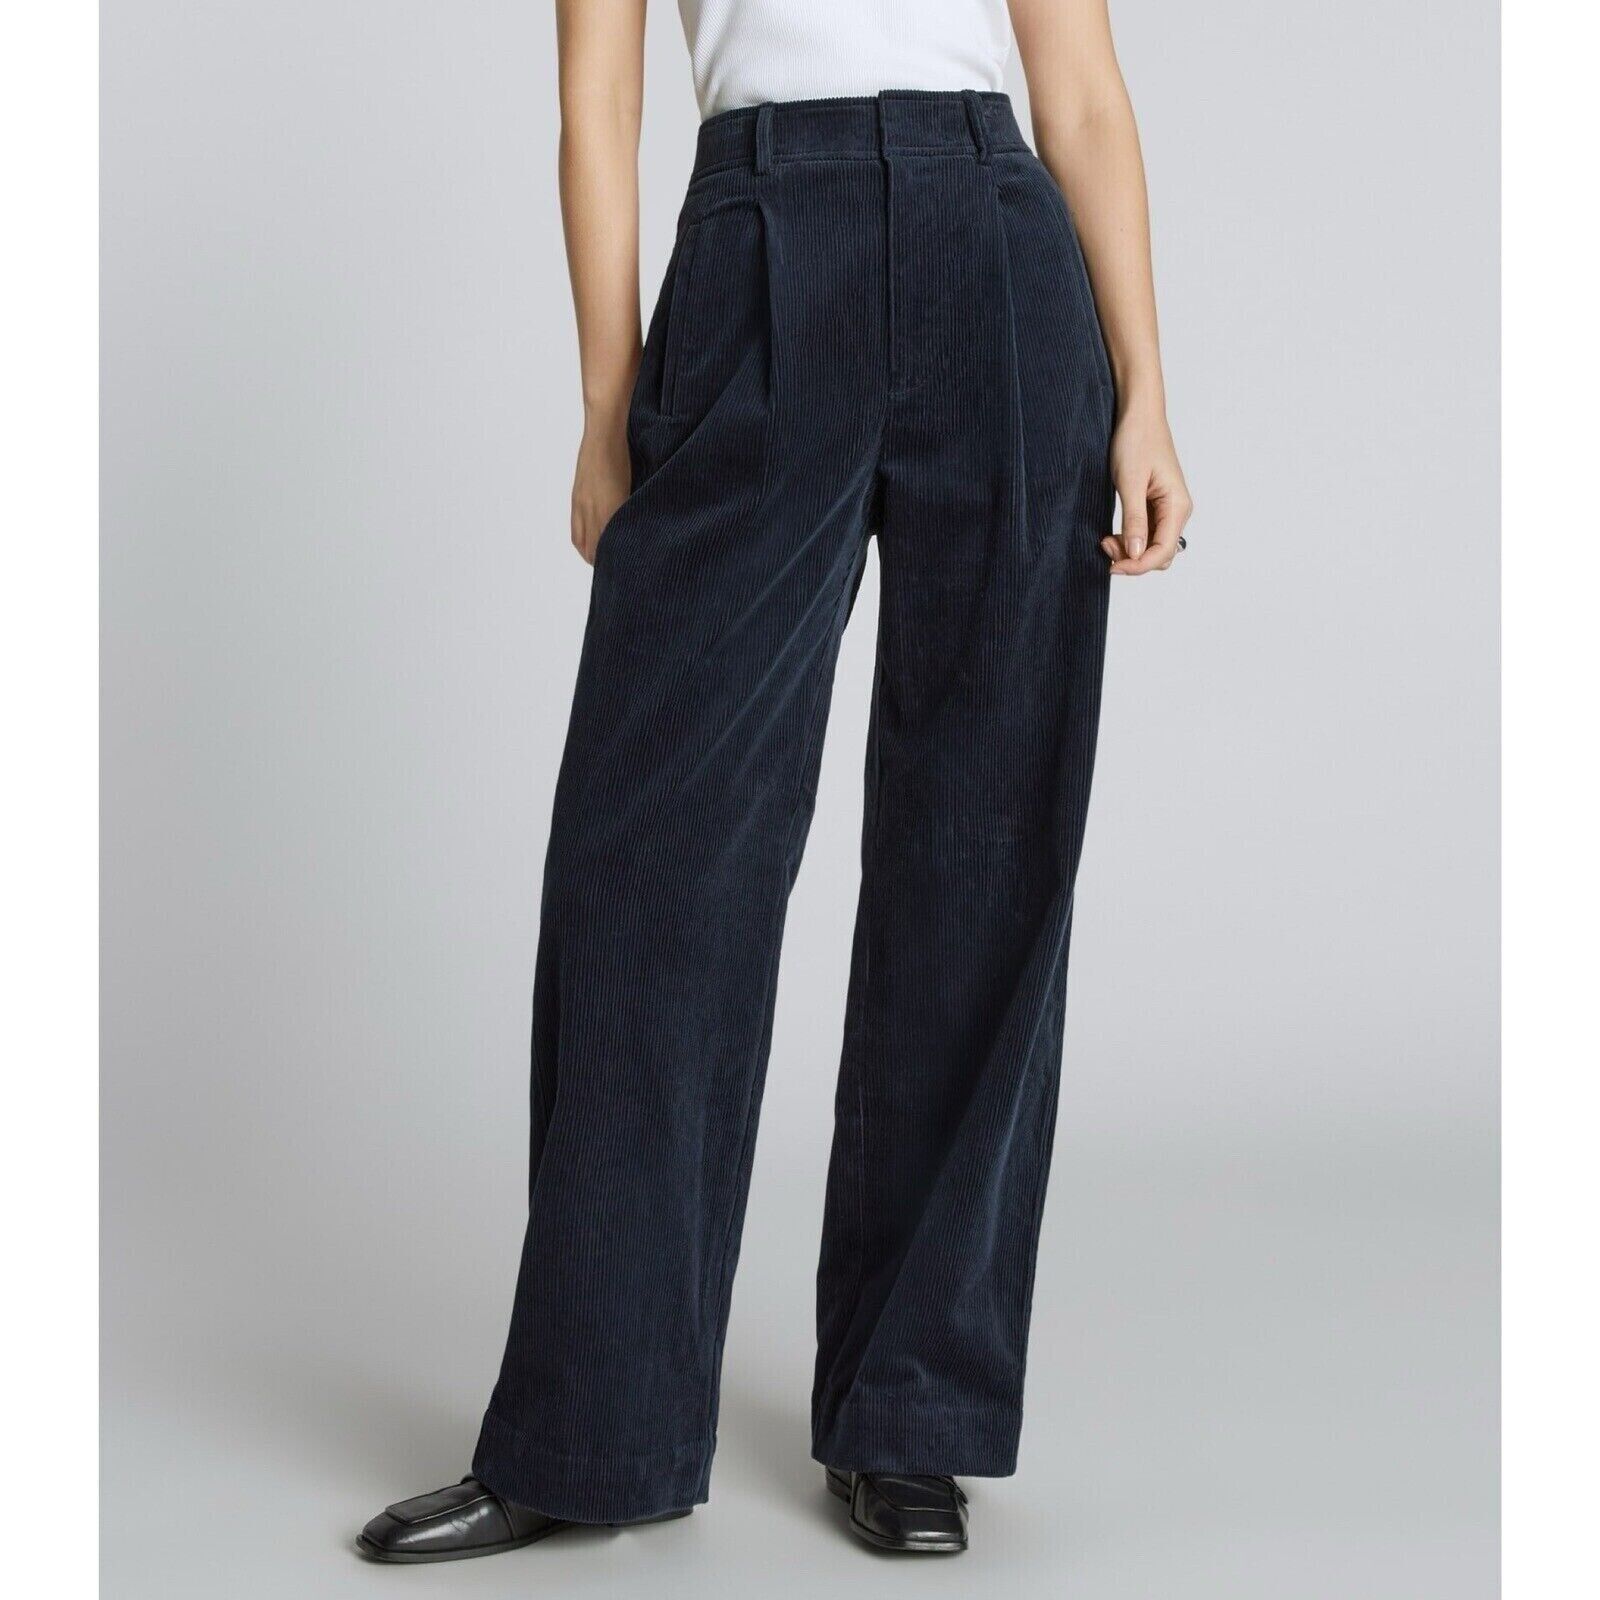 Primary image for Everlane Womens The Corduroy Way-High Drape Pant Navy Blue 4